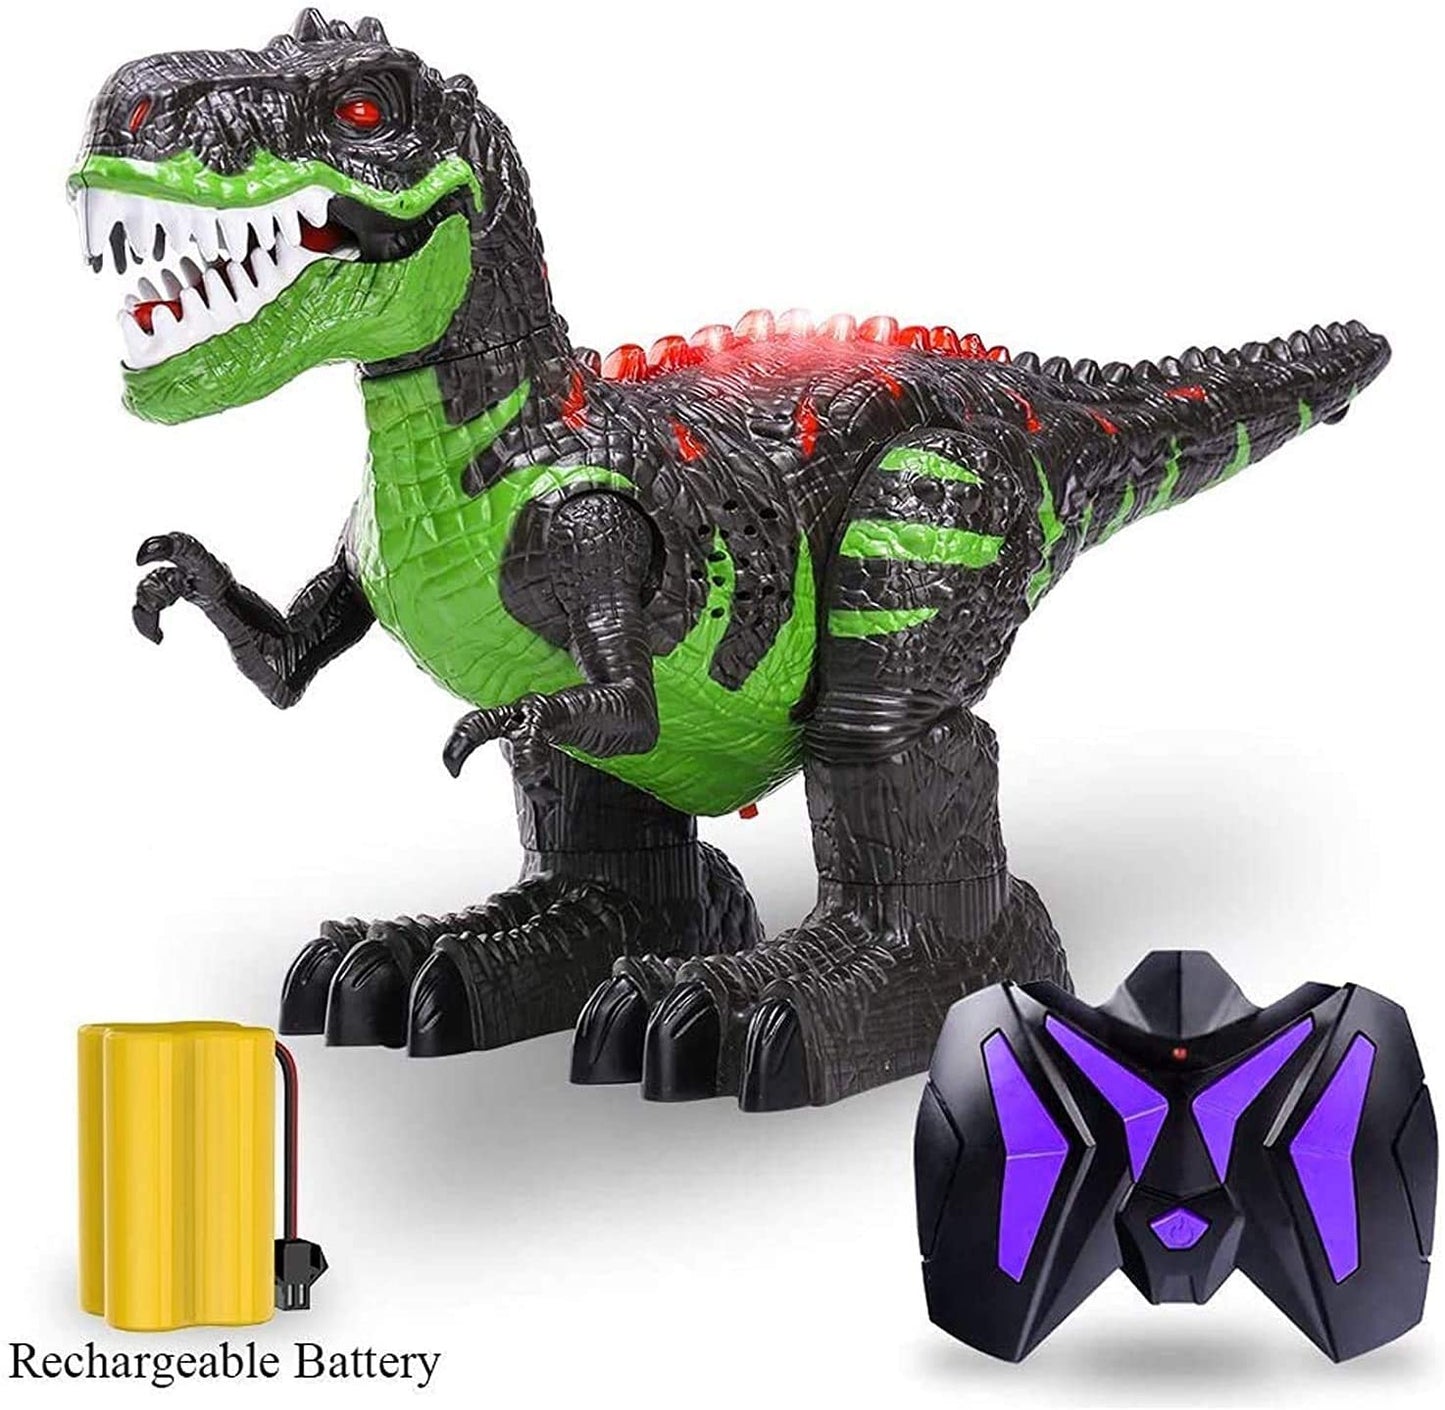 TEMI 8 Channels 2.4G Remote Control Dinosaur for Kids